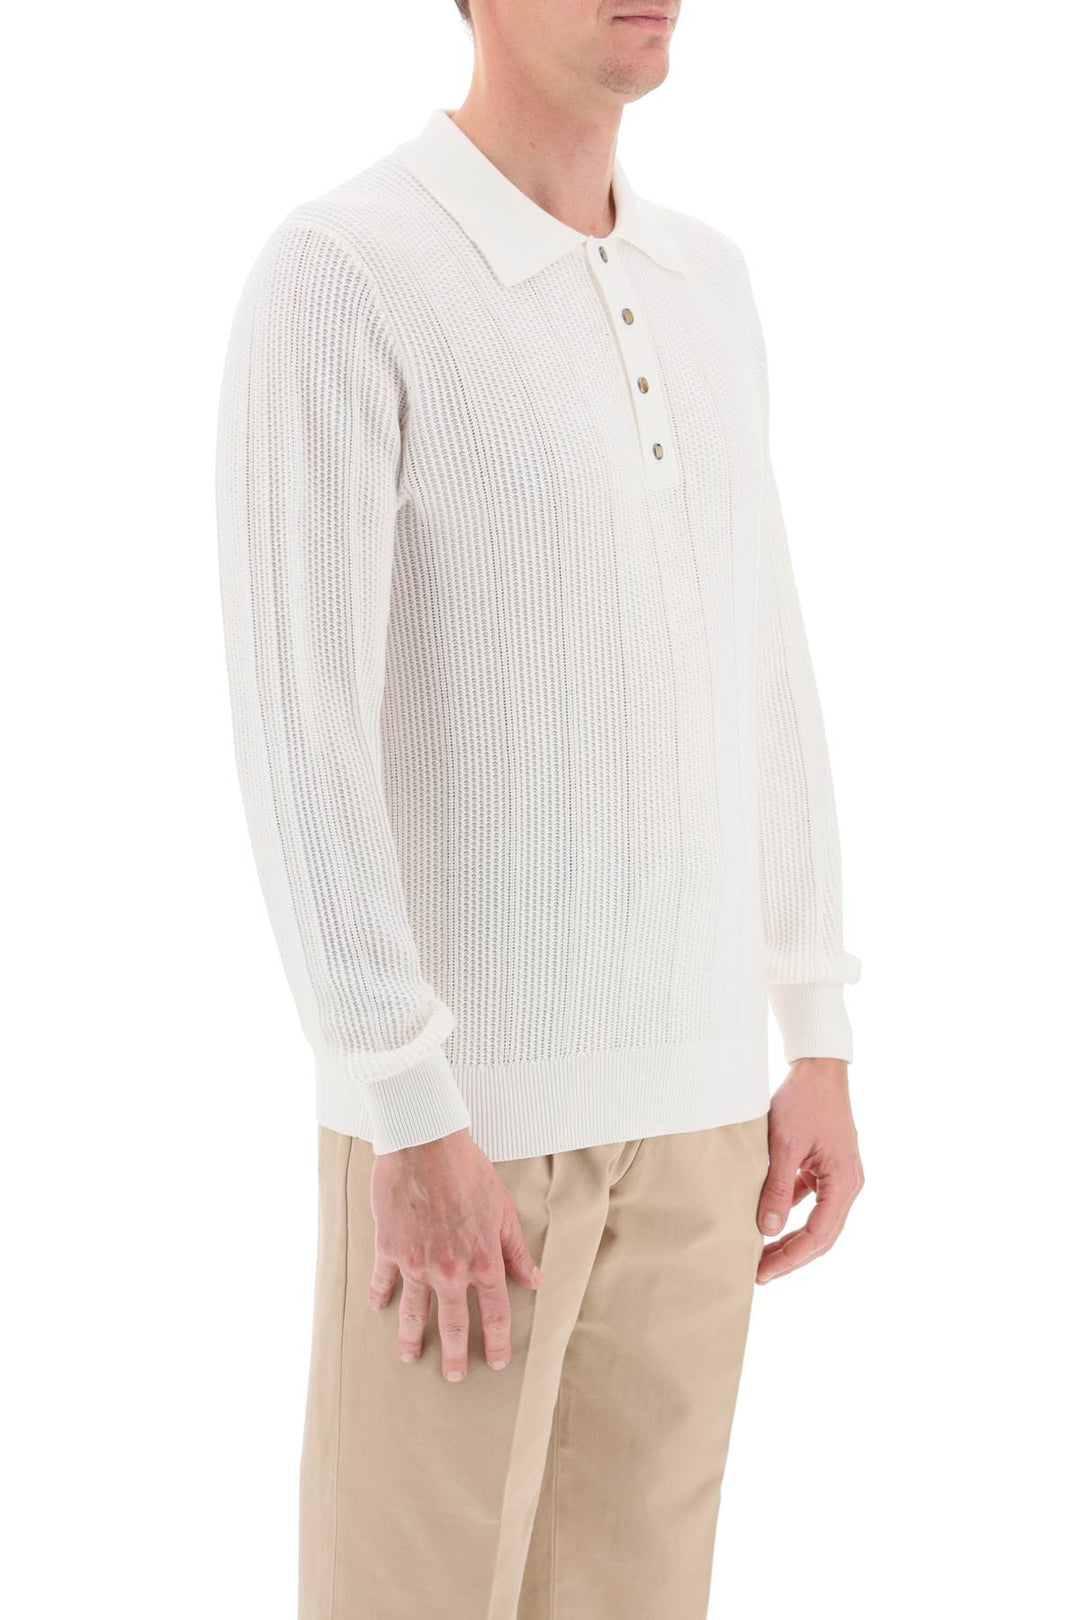 Brunello Cucinelli Long Sleeved Knitted Polo Shirt   Bianco